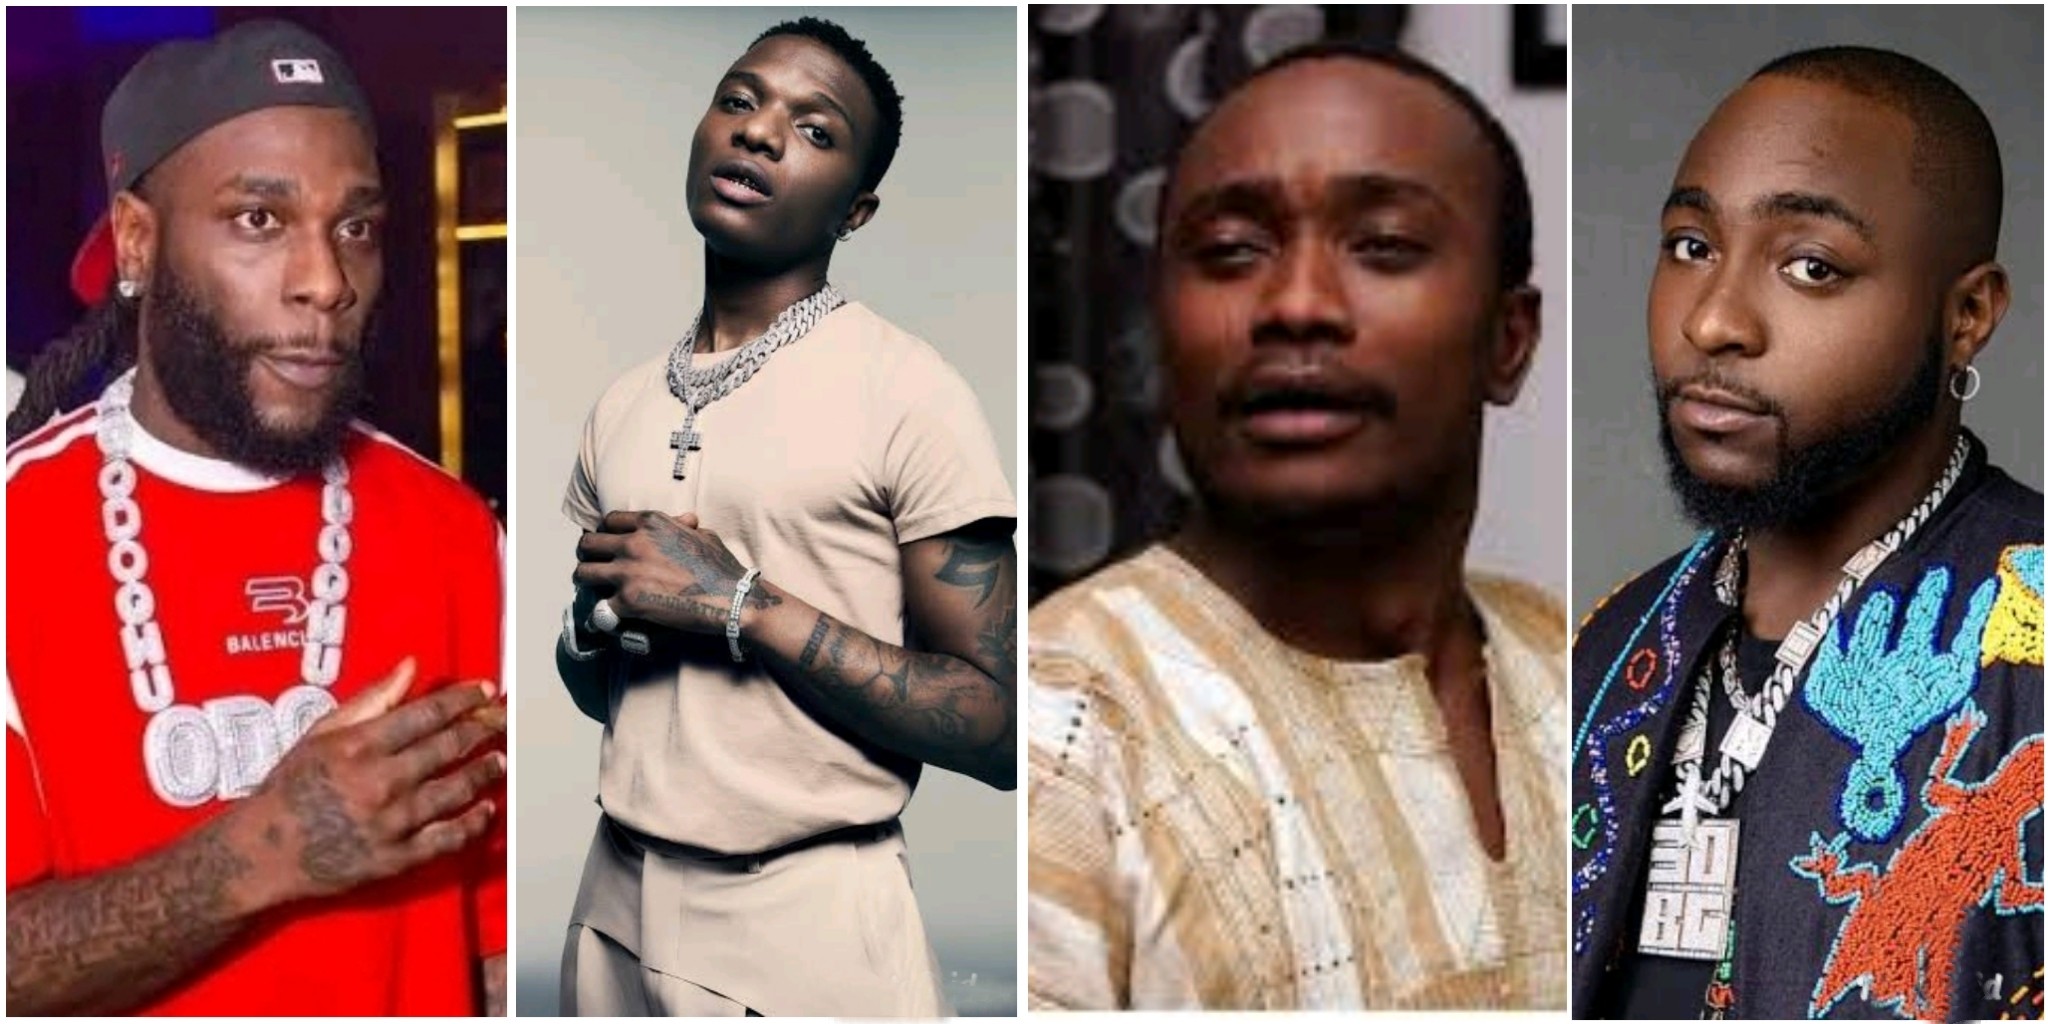 Afrobeat: “They are all thieves” – Brymo roasts Burna Boy, Wizkid and Davido in new interview (VIDEO)